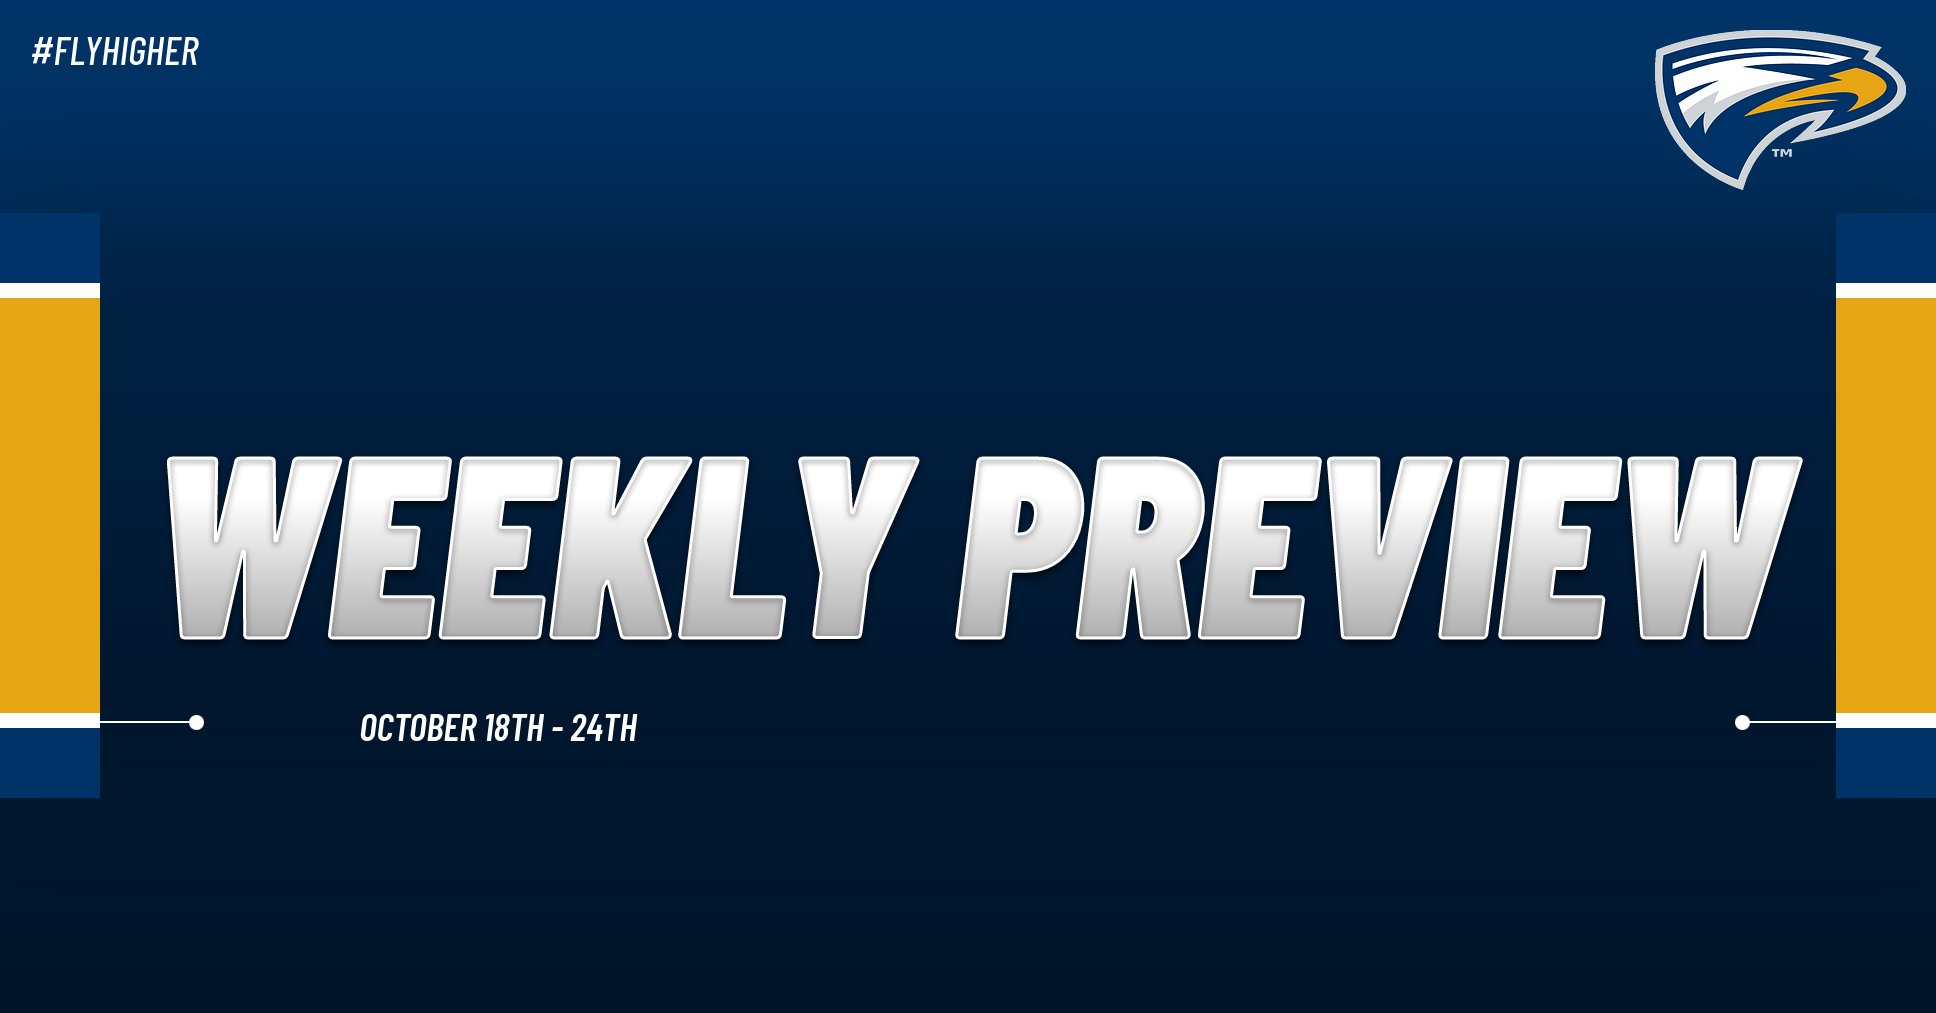 Emory Athletics Weekly Preview - October 18th - 24th